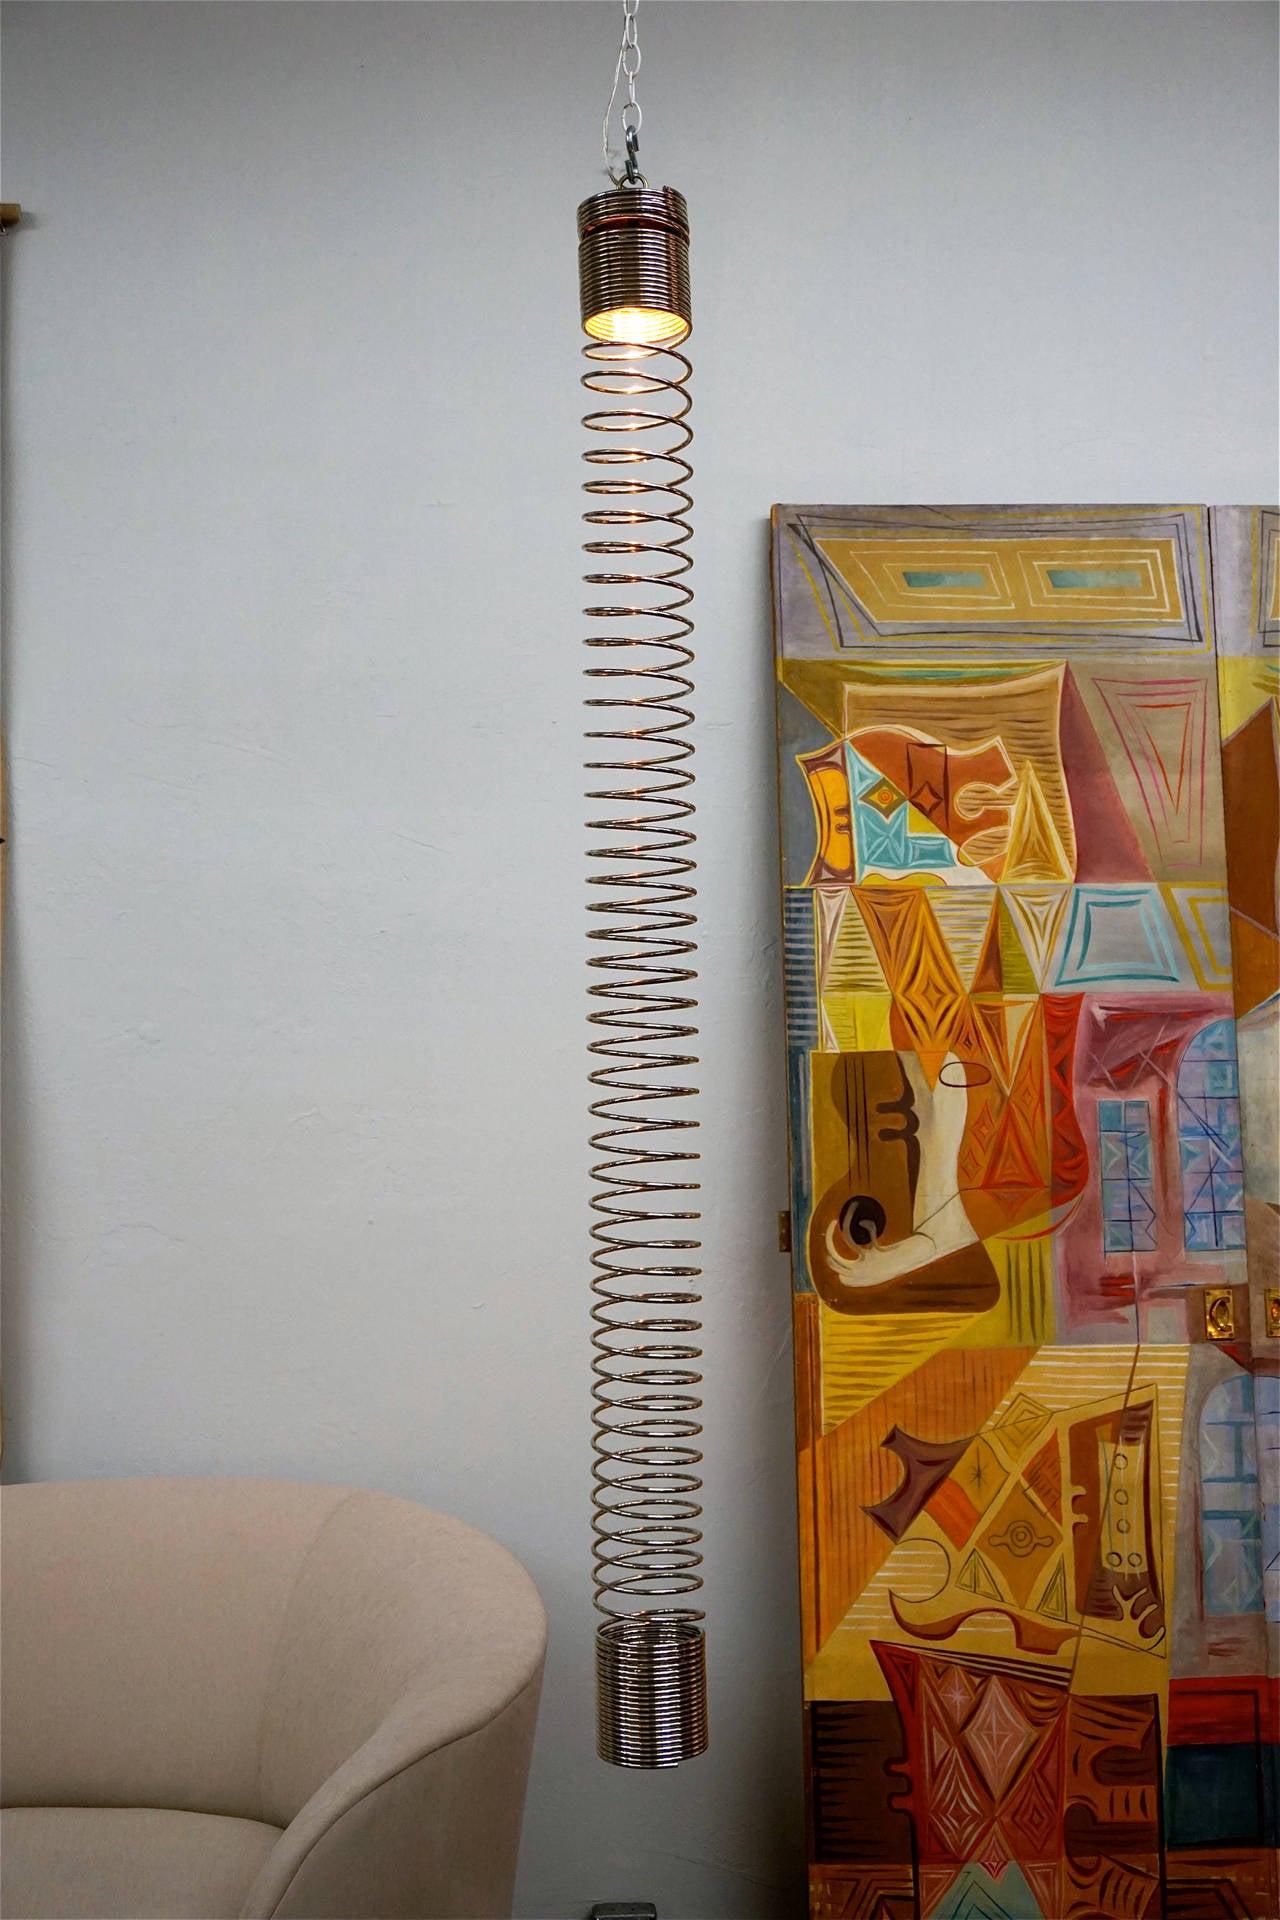 Designed for Candle, Milan, Italy in the 1960s.
A slinky on steroids!